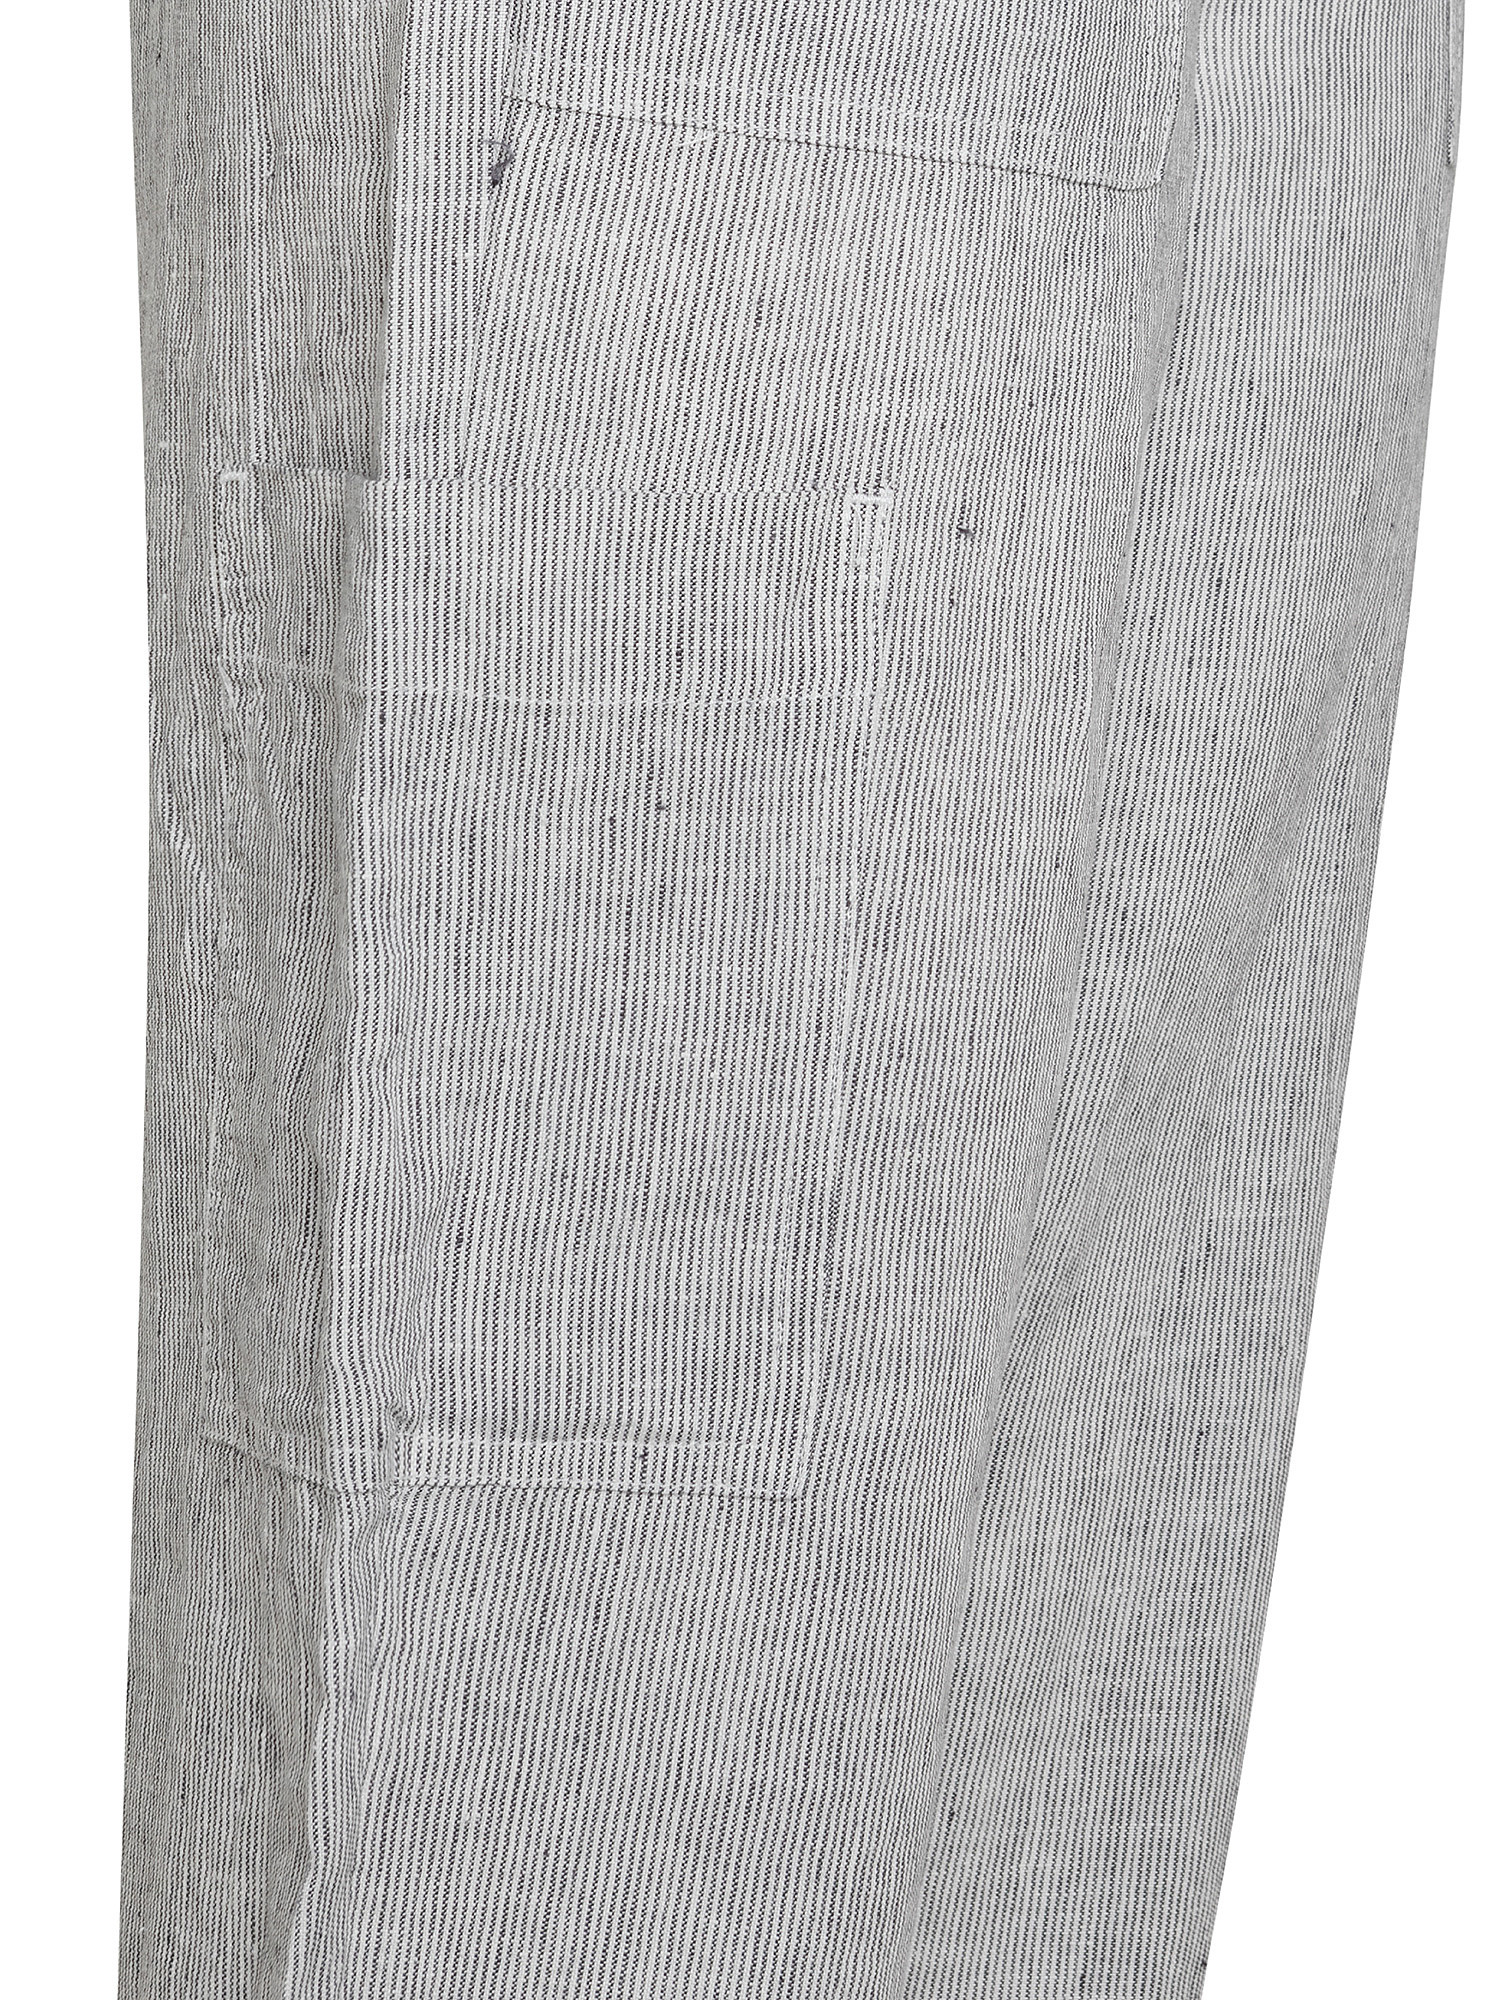 Pantalone jogger a righe, Grigio, large image number 2